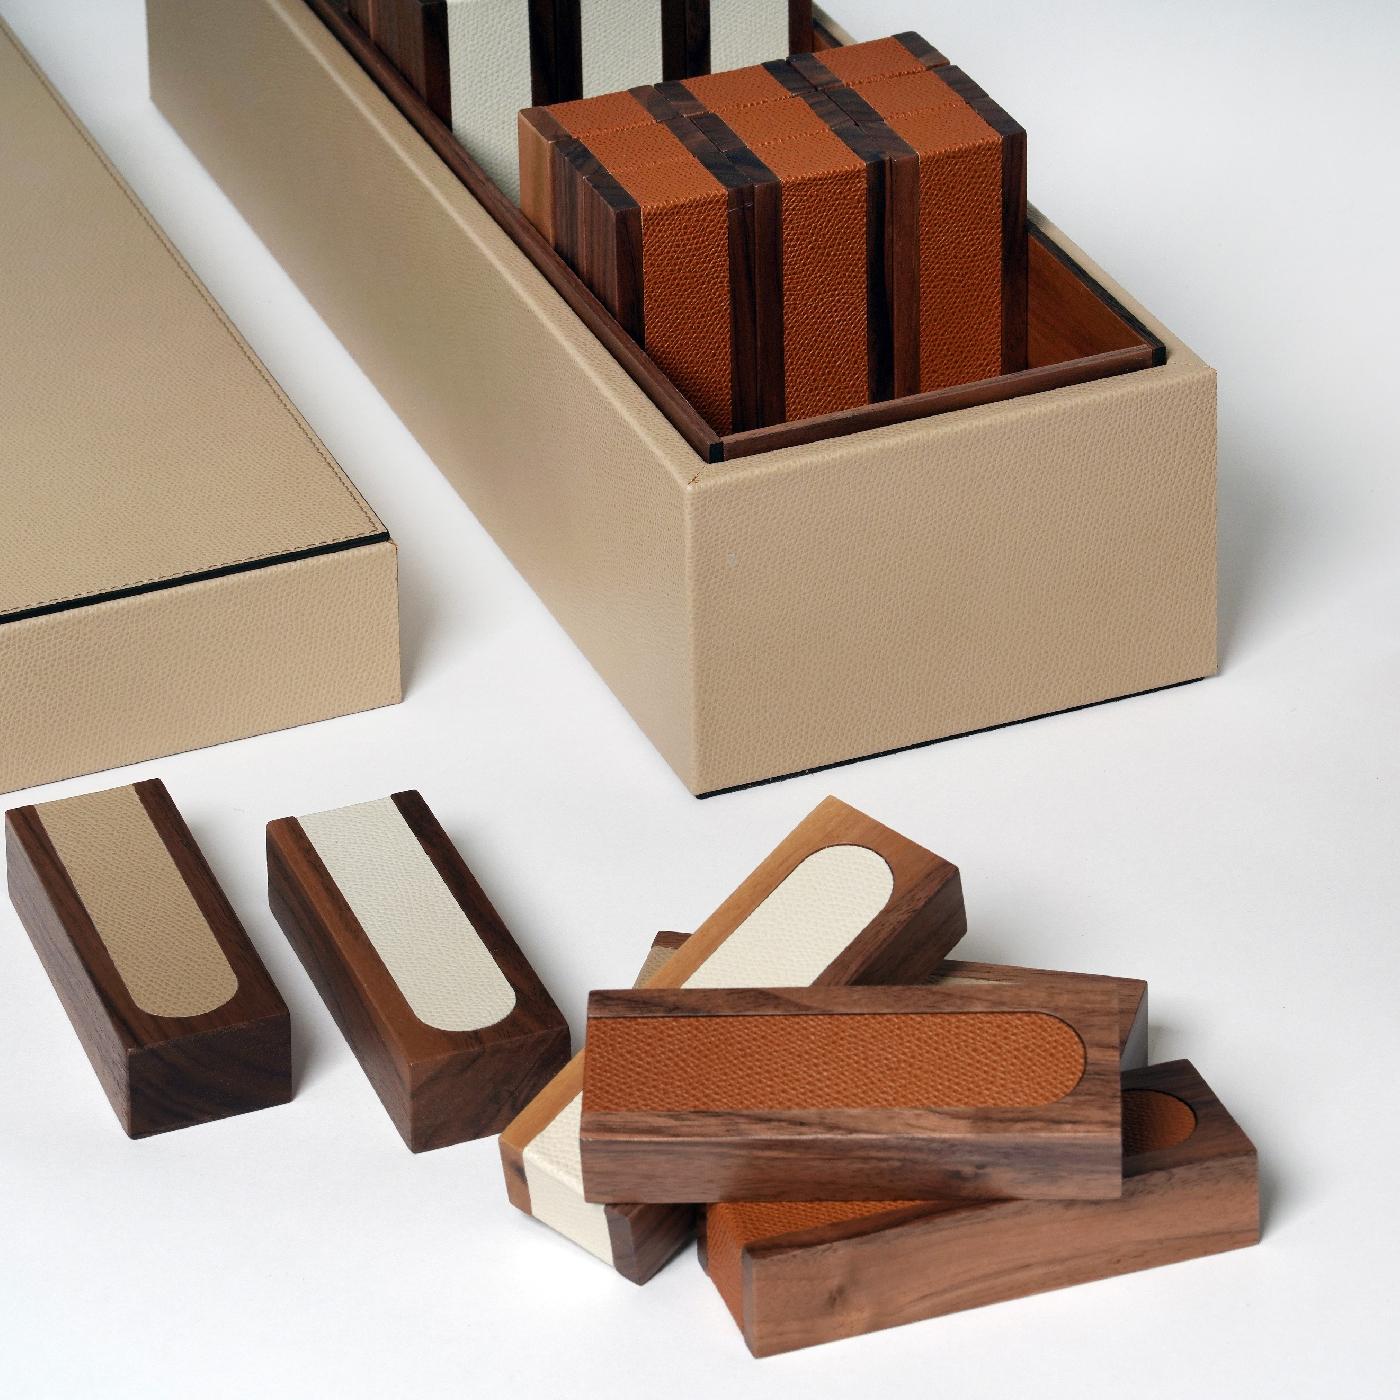 Compact, elegant, and functional, this captivating box set is an iconic board game that will be a timeless addition to a living room decor. The 54 pieces are crafted of Canaletto walnut accented with biege, white, and red lateral leather bands. The